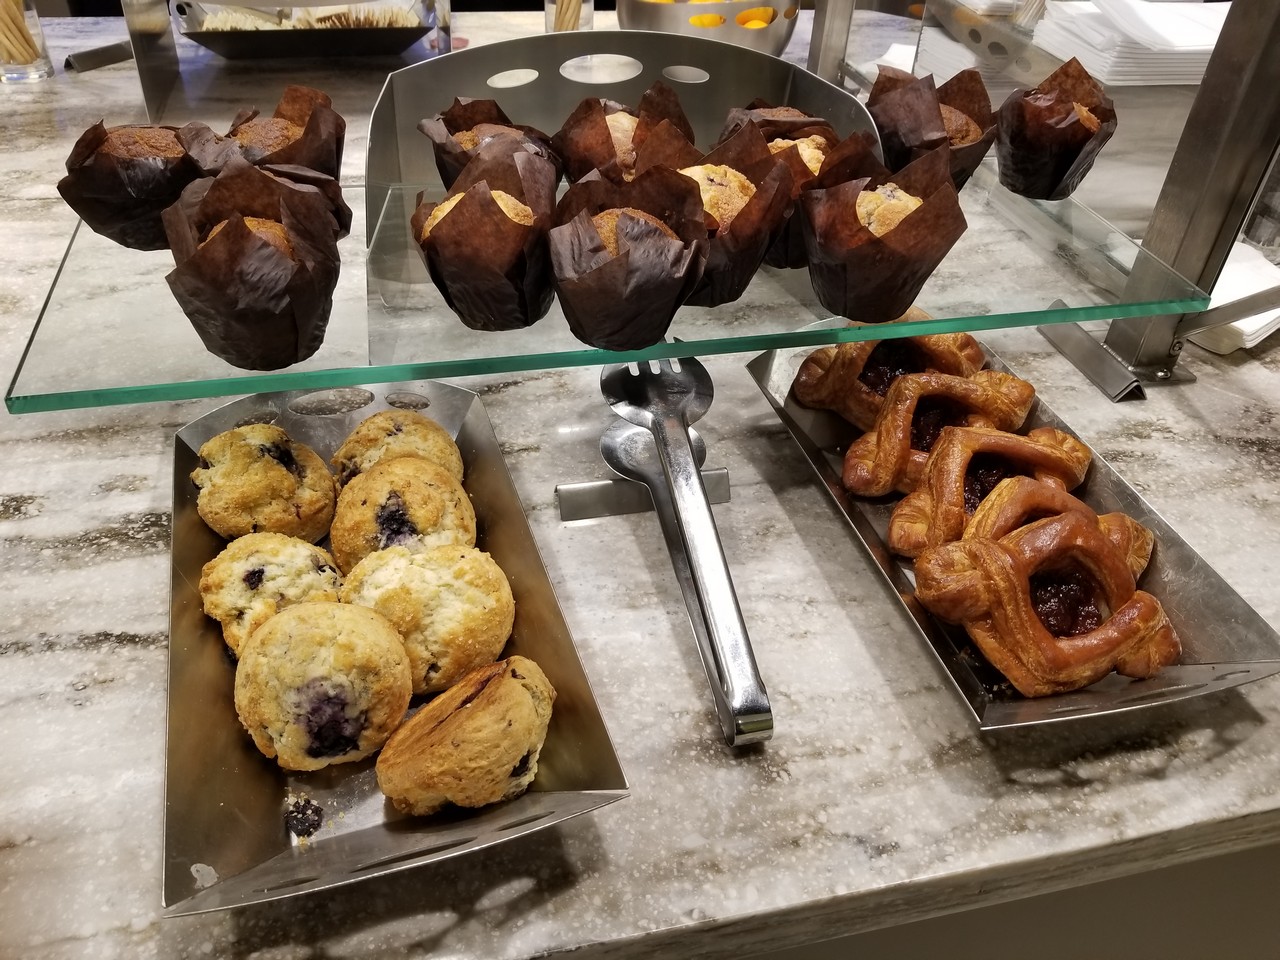 a tray of pastries and muffins on a counter